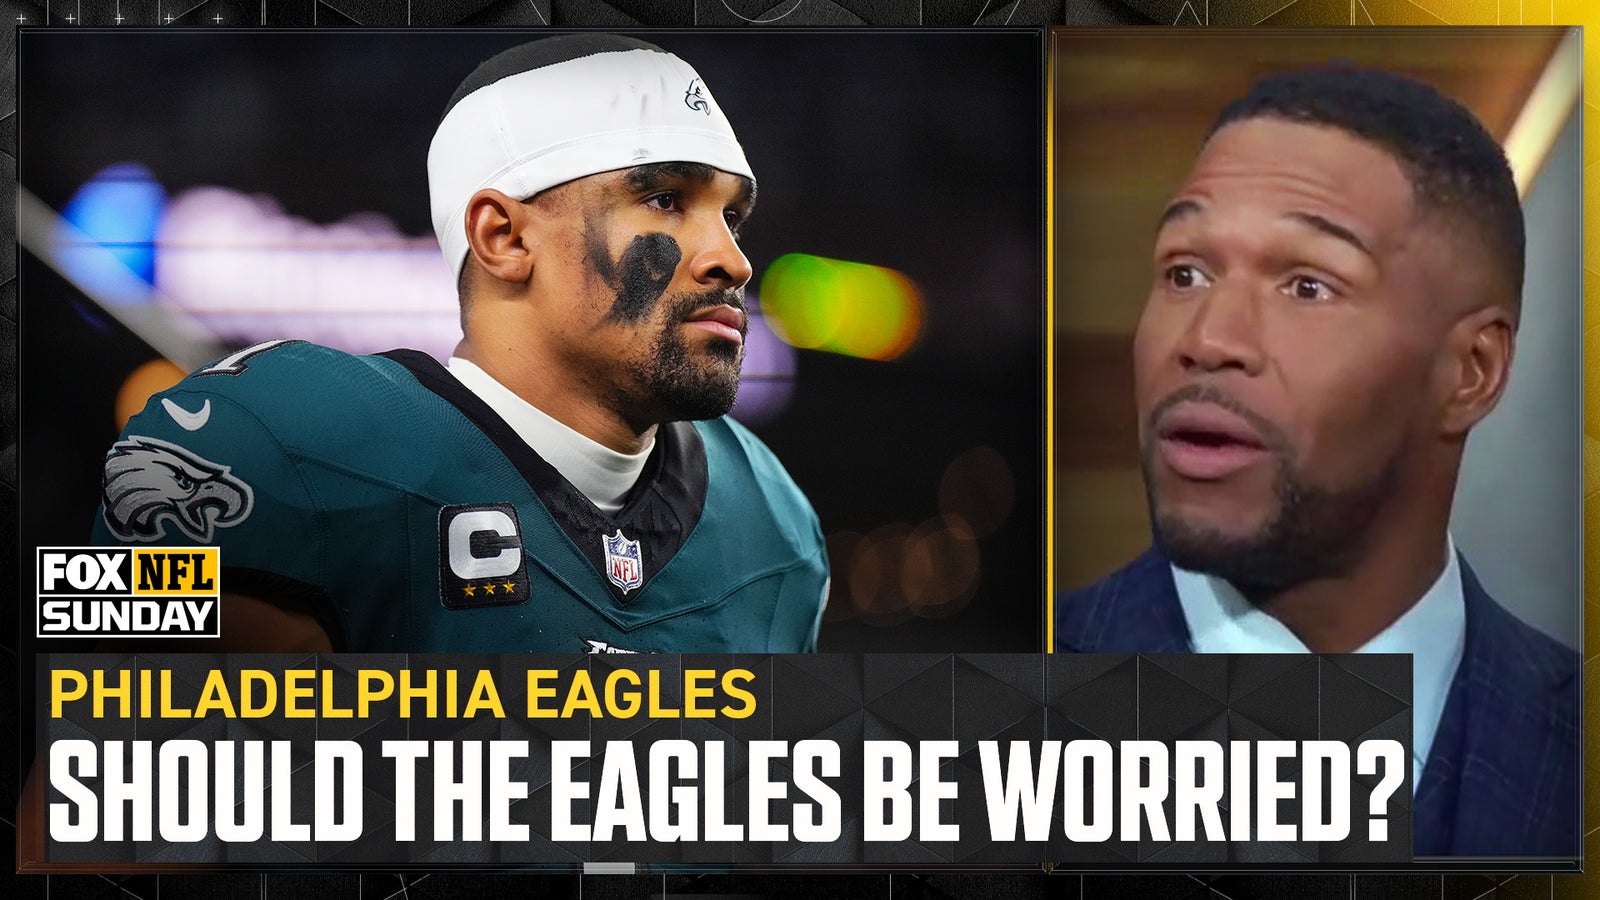 'FOX NFL Sunday' crew discuss the Eagles recent woes as the playoffs approach